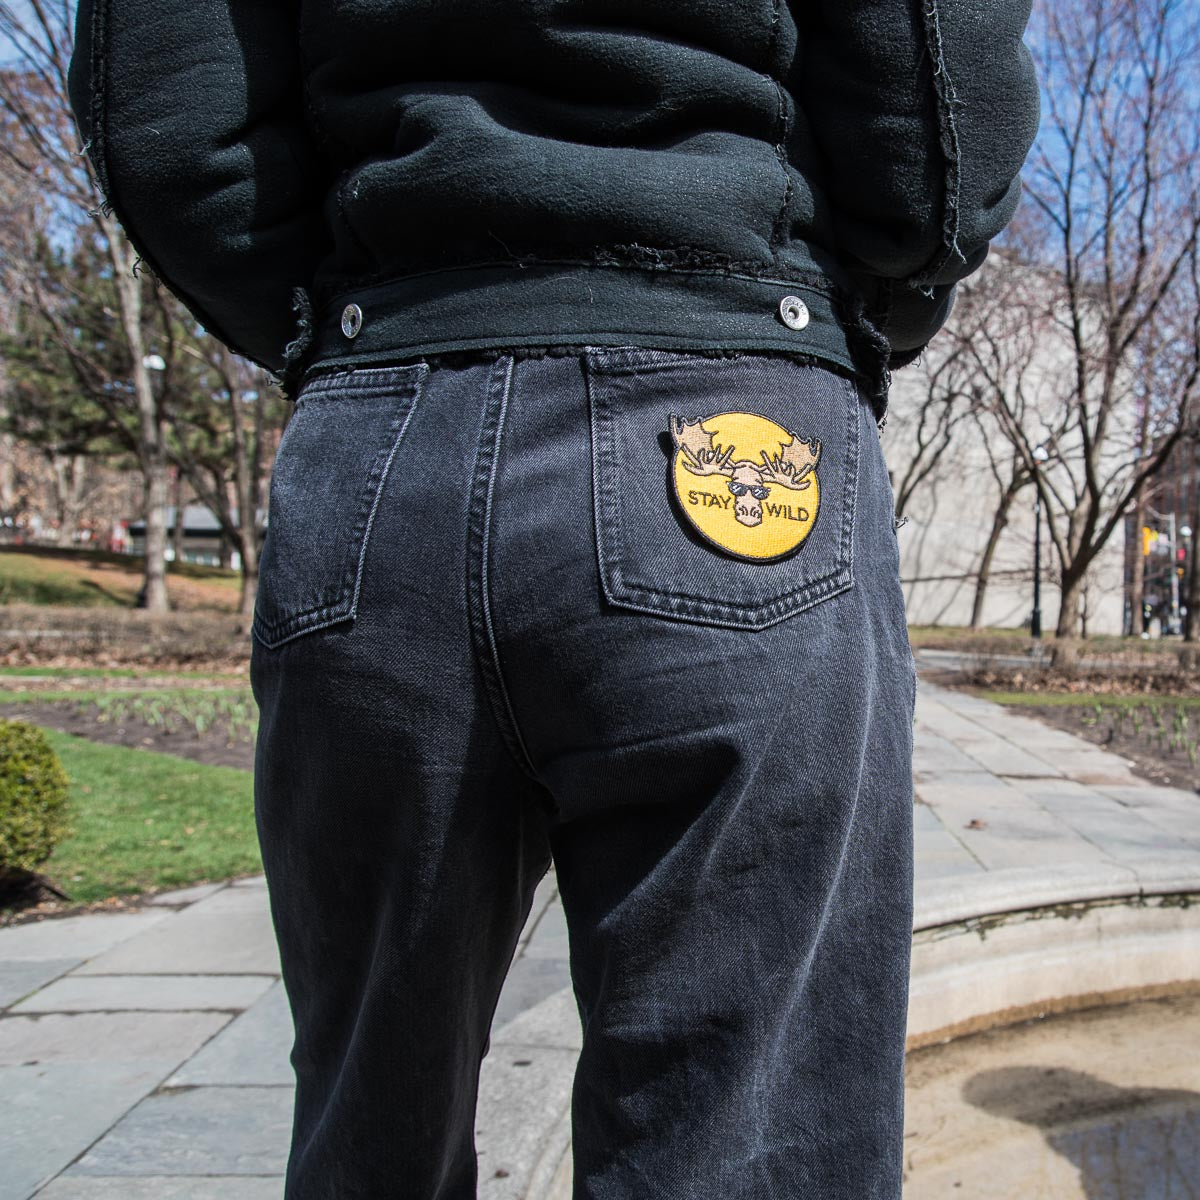 girl wearing black jeans with yellow circle patch with moose illustration with sunglasses and stay wild text featured on the right jean pocket